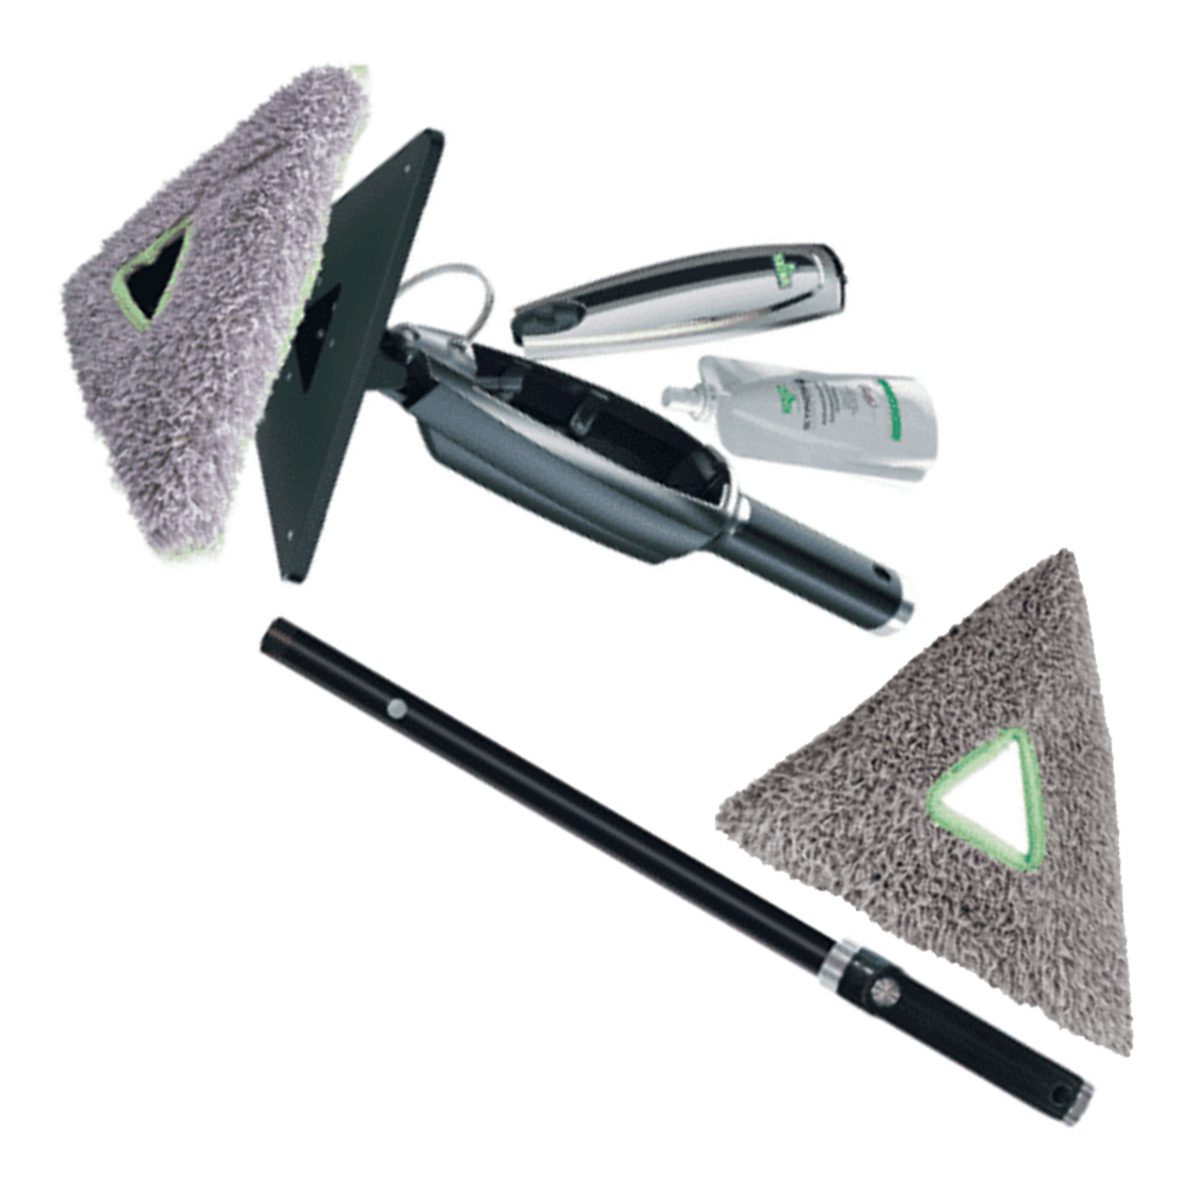 cleaning-equipment-squeegees-and-window-cleaning-unger-stingray-indoor-kit-indoor-cleaning-superior-cleaning-power-lint-free-easy-glide-microfiber-vjs-distributors-UNGSRKT2